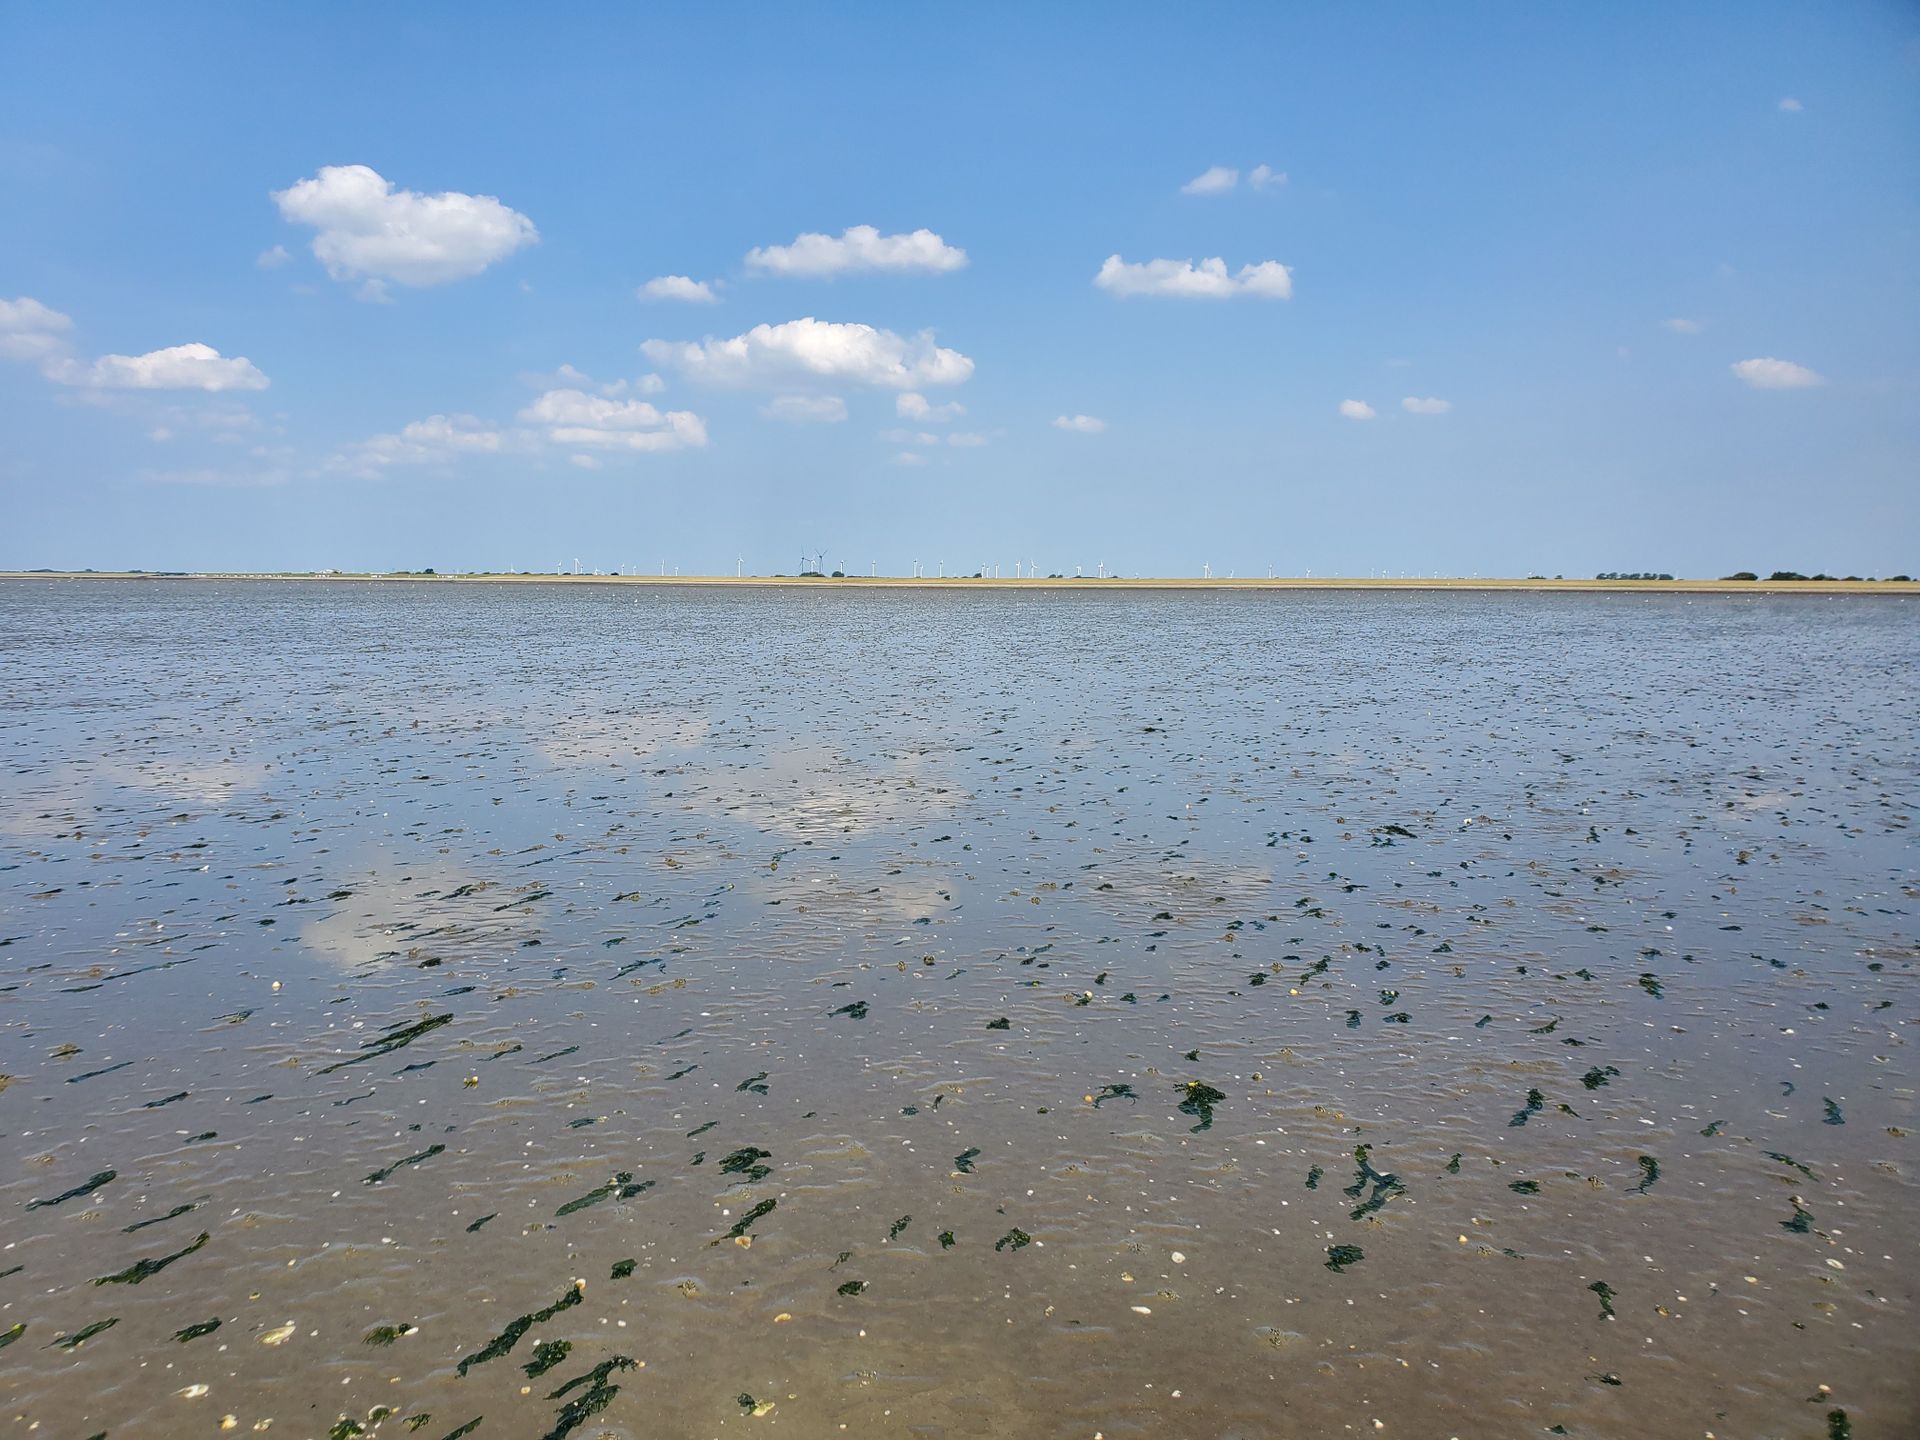 Mudflats with lots of sea lettuce